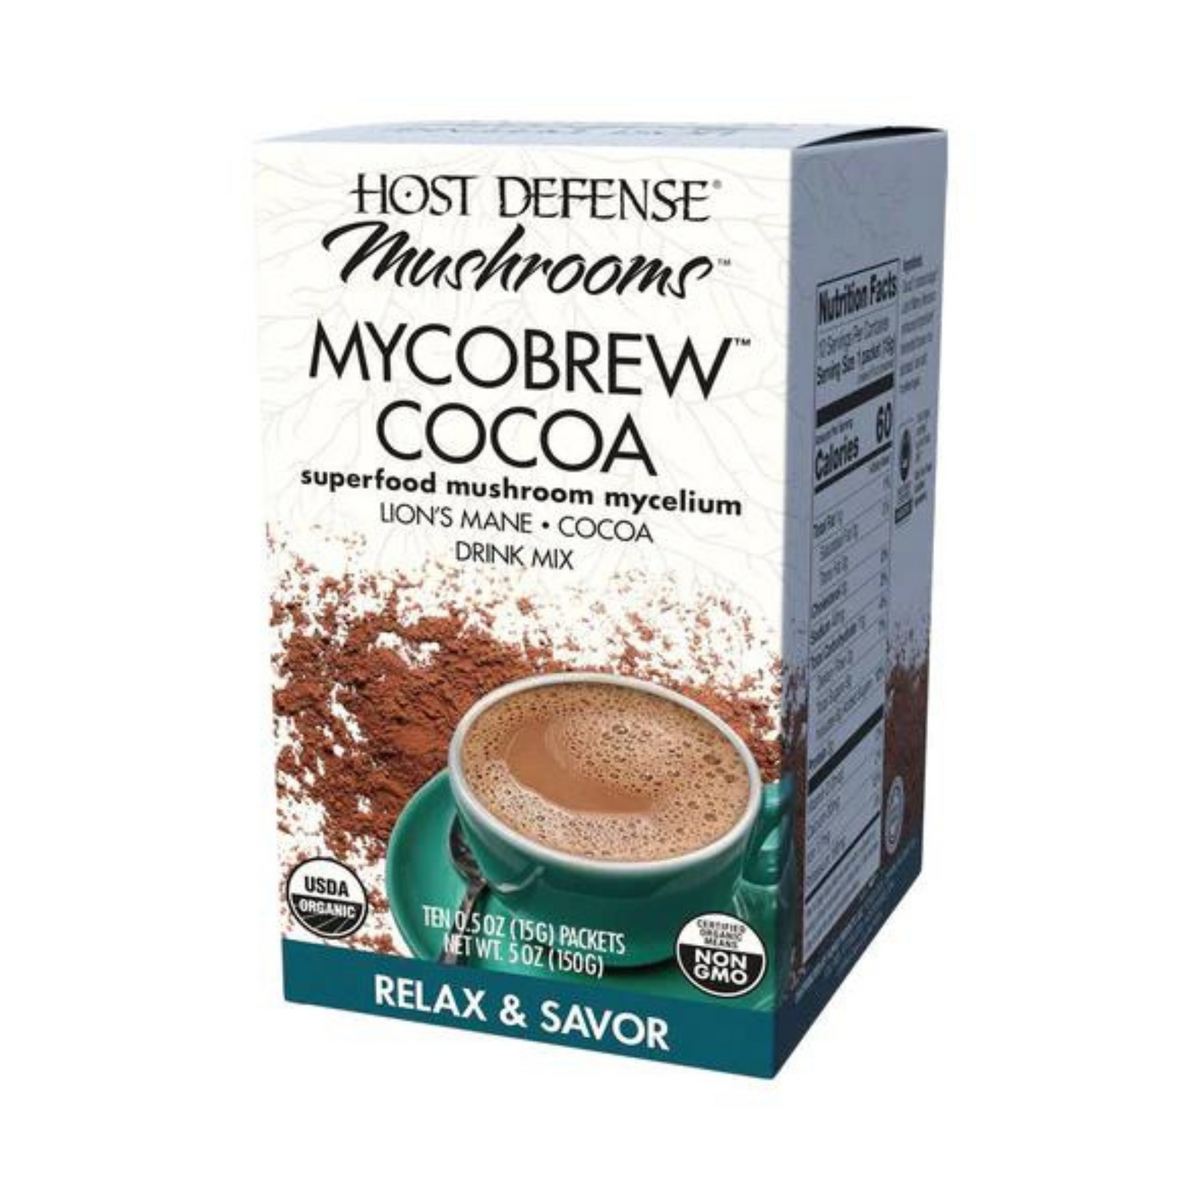 Primary Image of Host Defense MycoBrew Cocoa Packets (10 count)